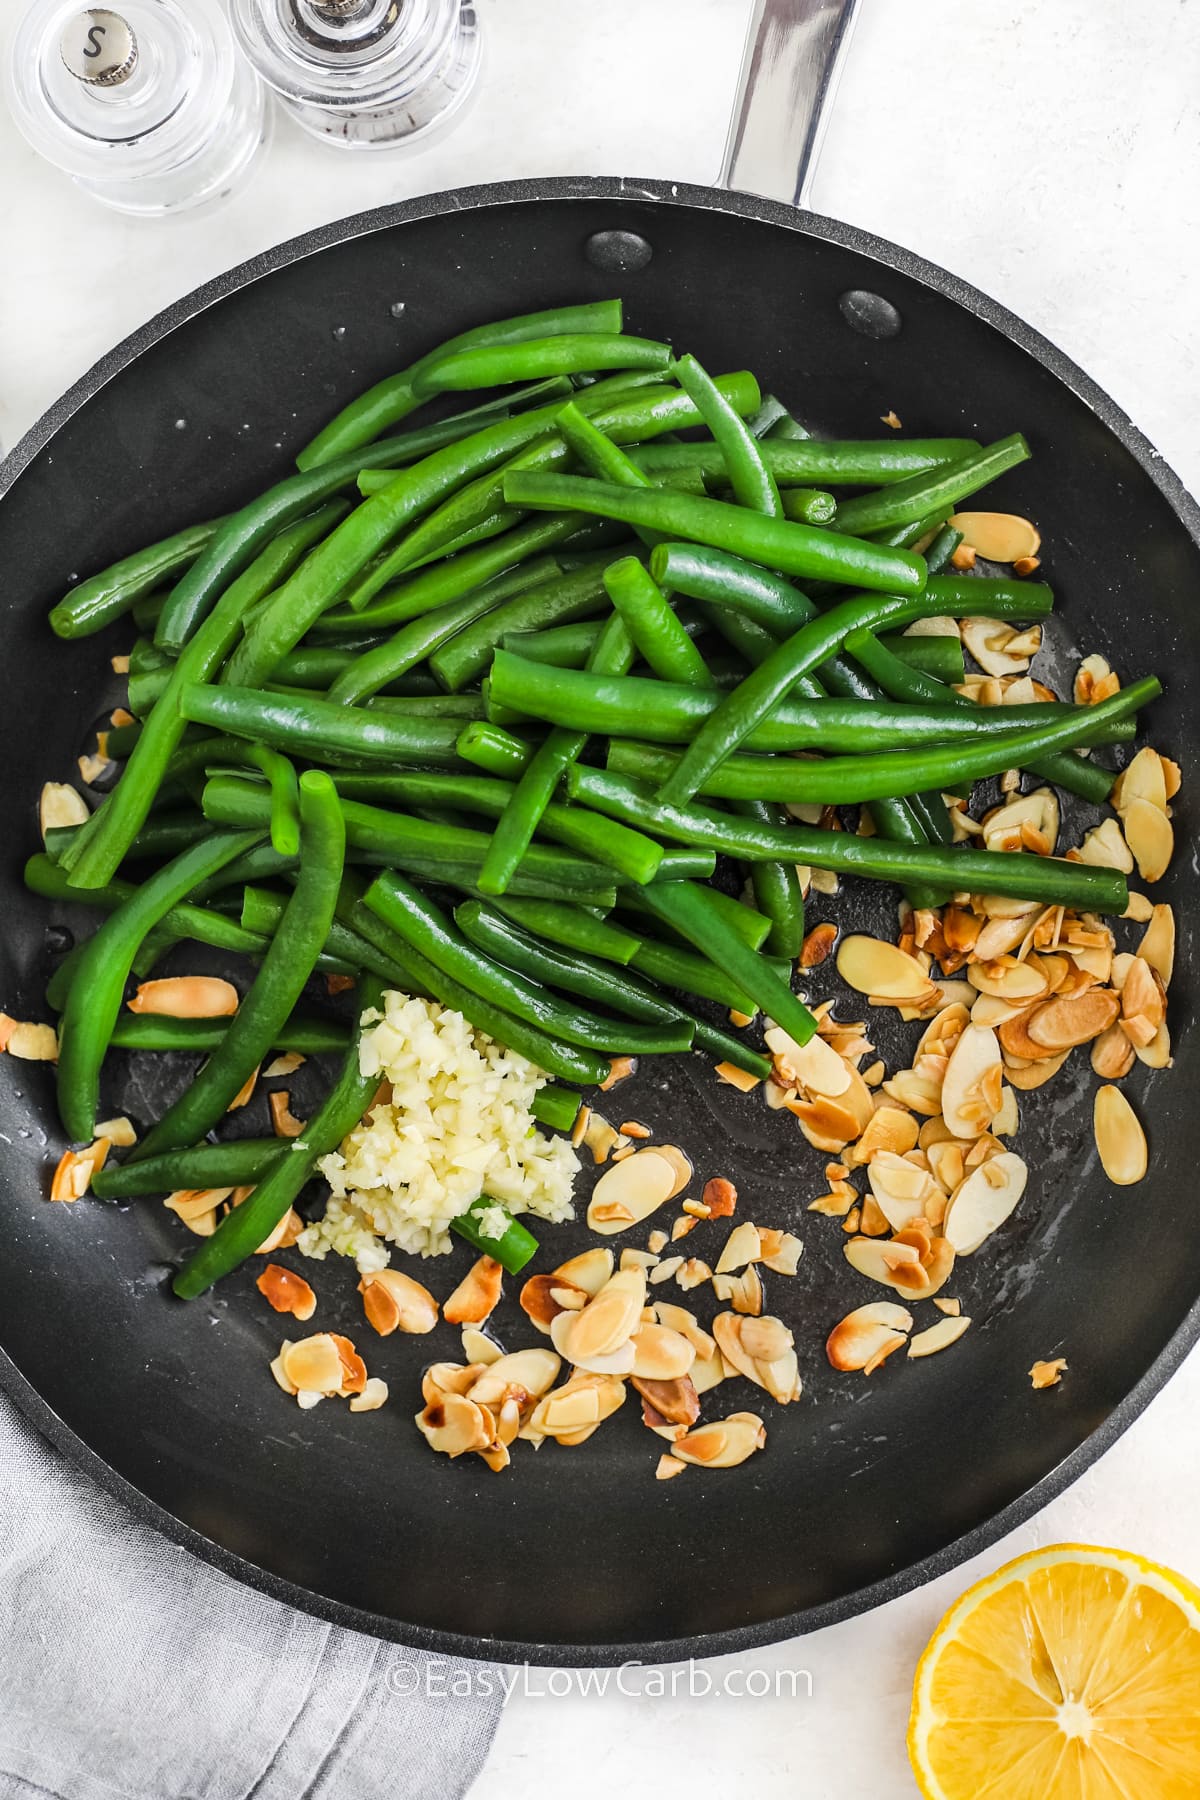 Ingredients to make Green Beans Almondine in a pan